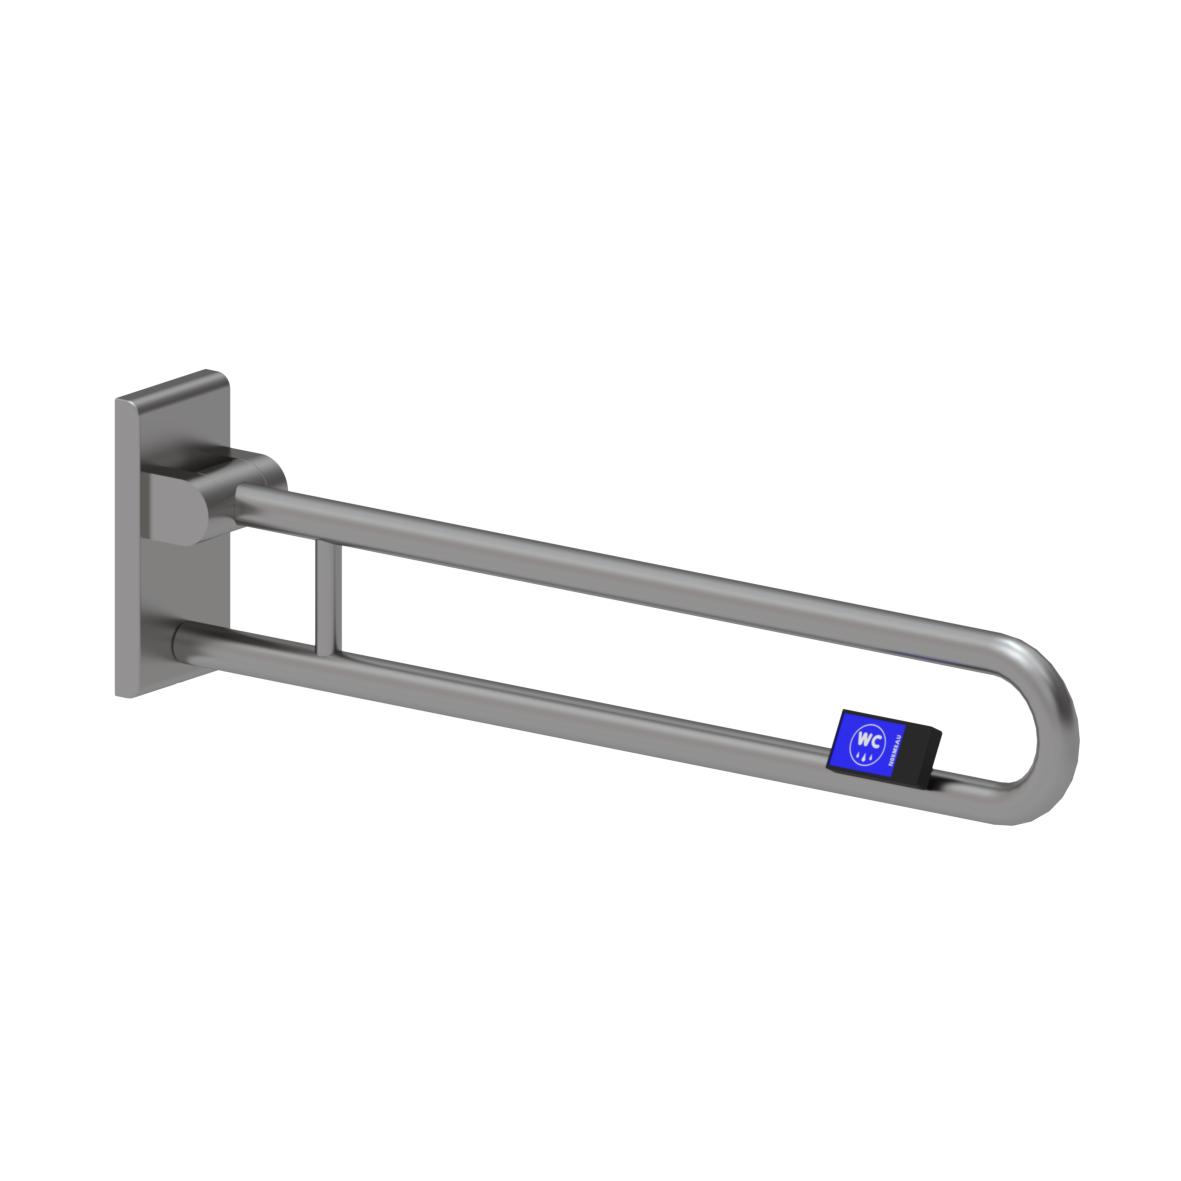 Inox Care Lift-up support rail vario, with base plate, with remote control, right, L = 850 mm, Stainless steel